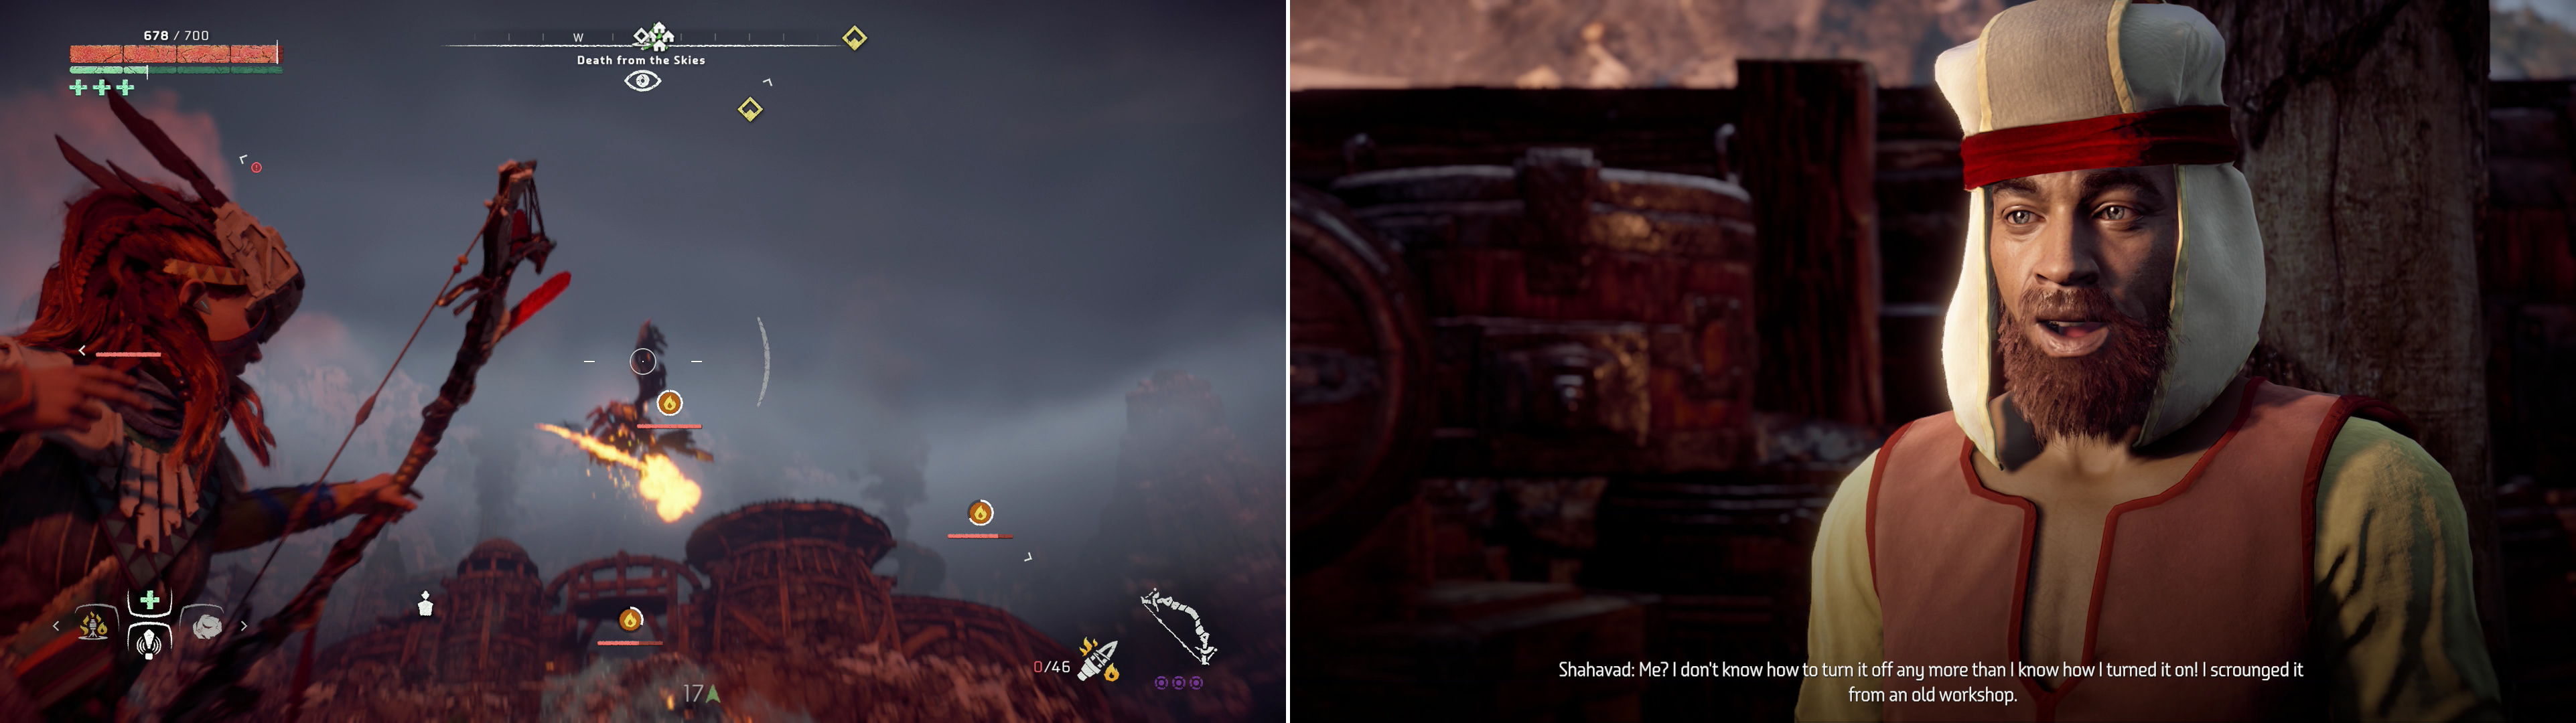 Shoot down the Glinthawks assaulting Pitchcliffs (left) then talk to Shahavad to learn what’s luring them (right).